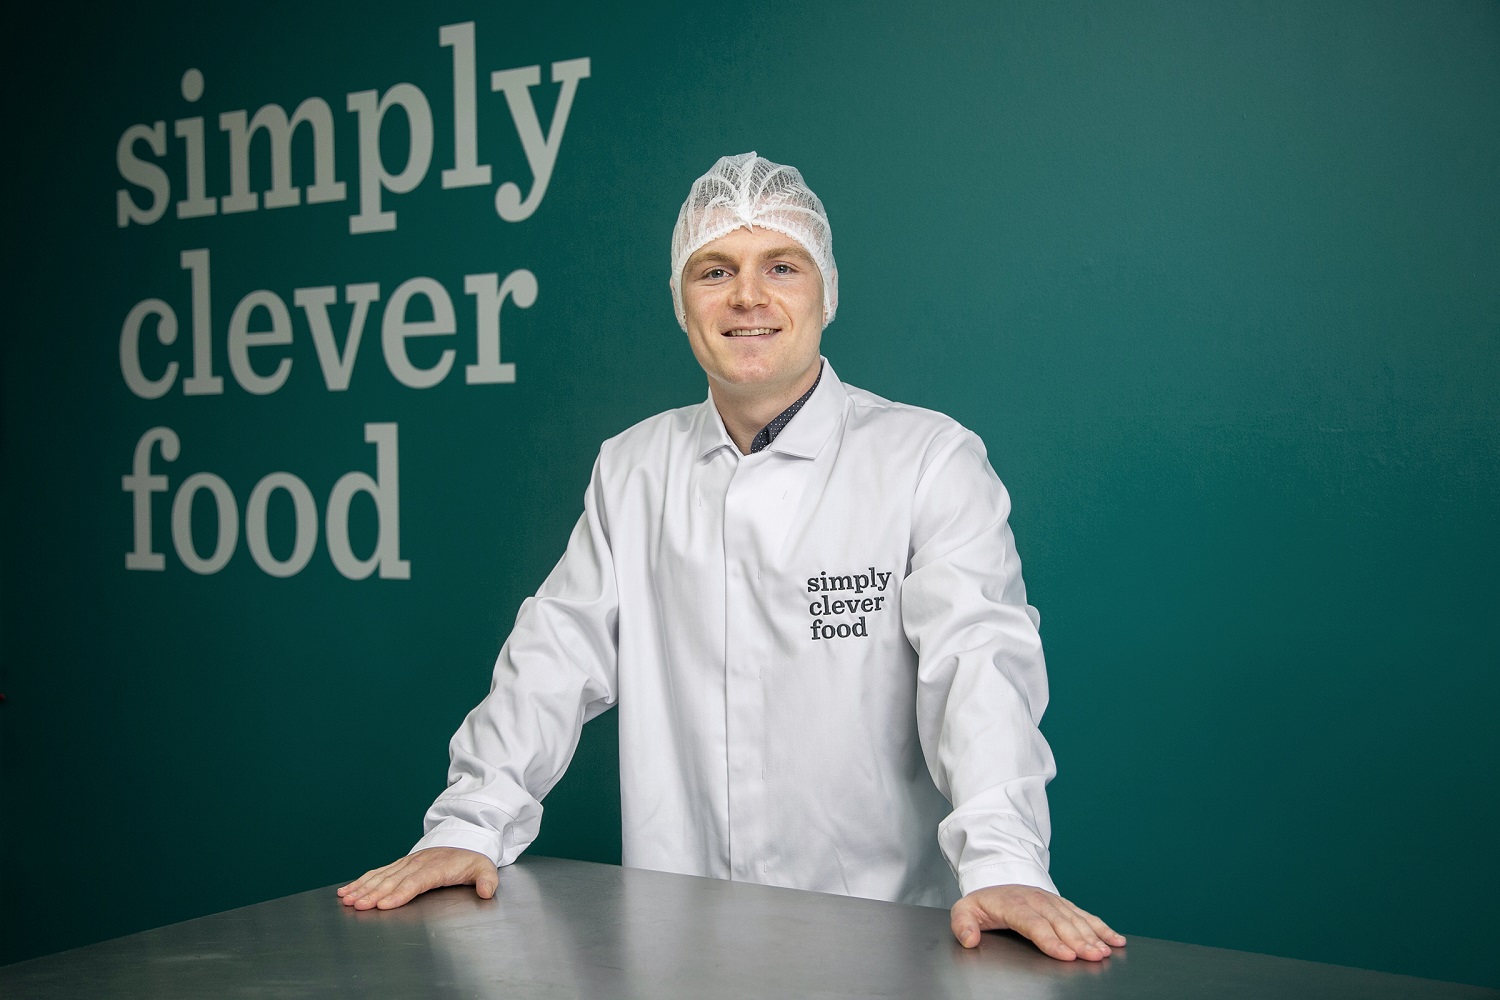 Tayside student secures innovation role at leading food firm